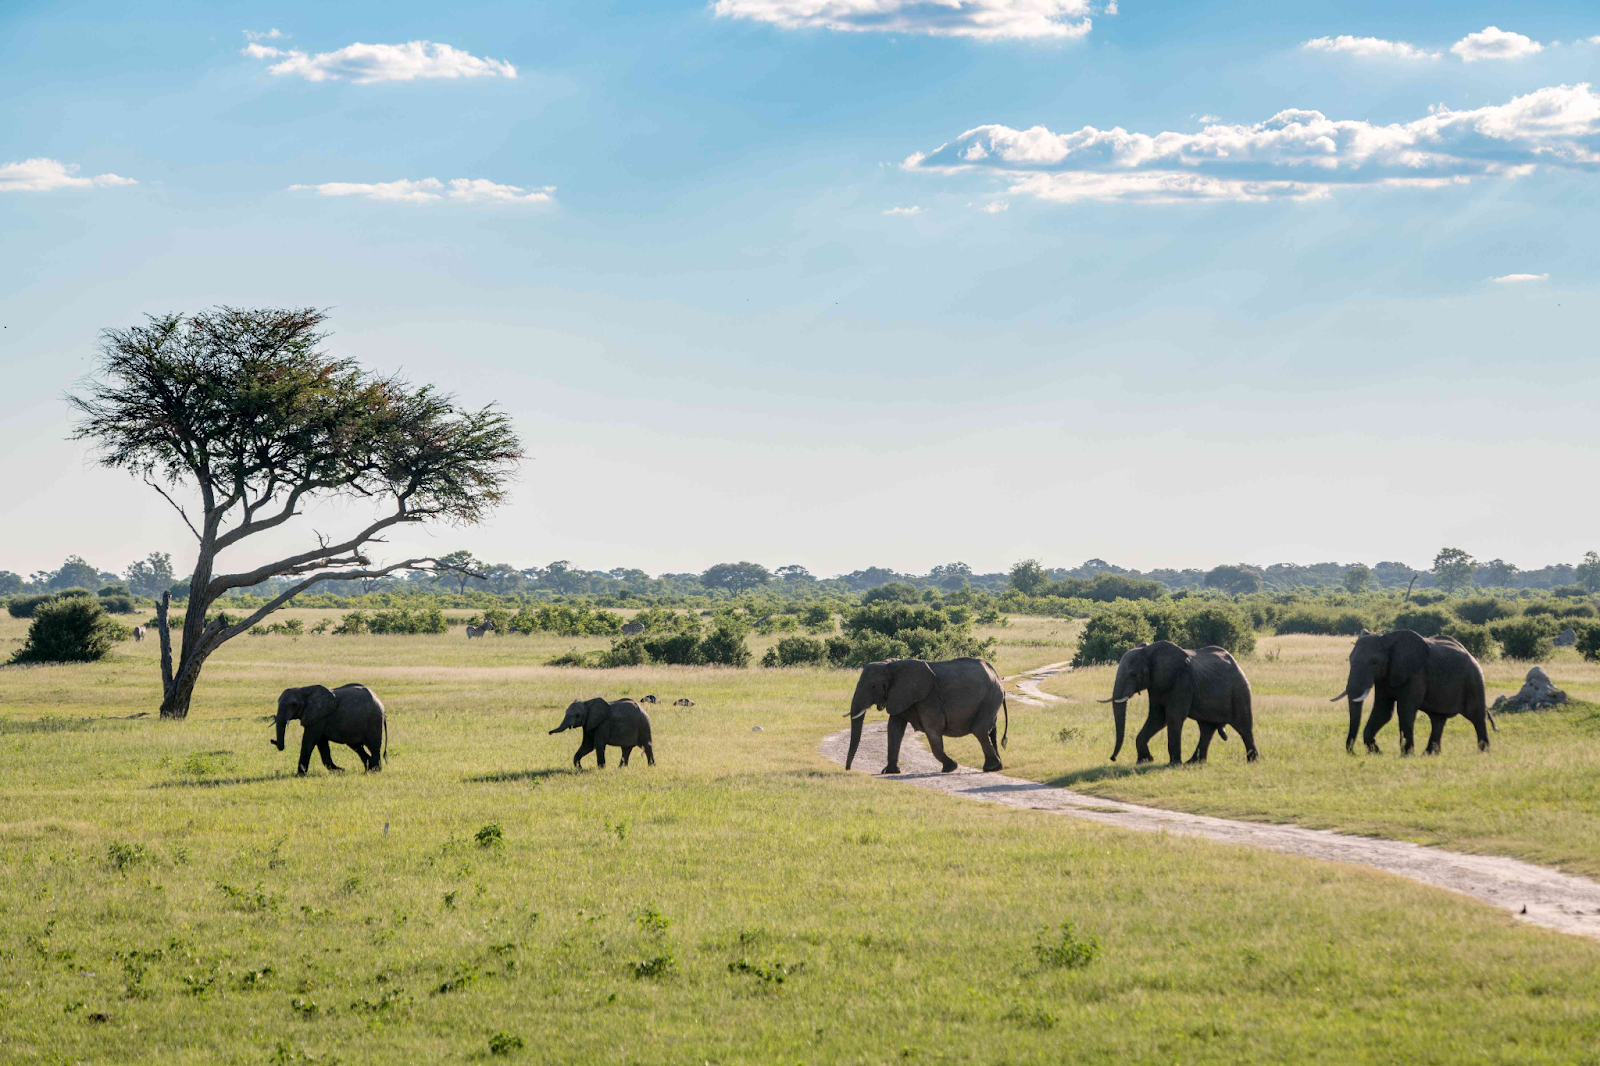 Hwange National Park shares beautiful woodland, fauna, grassland and is a perfect picture place for wildlife photography